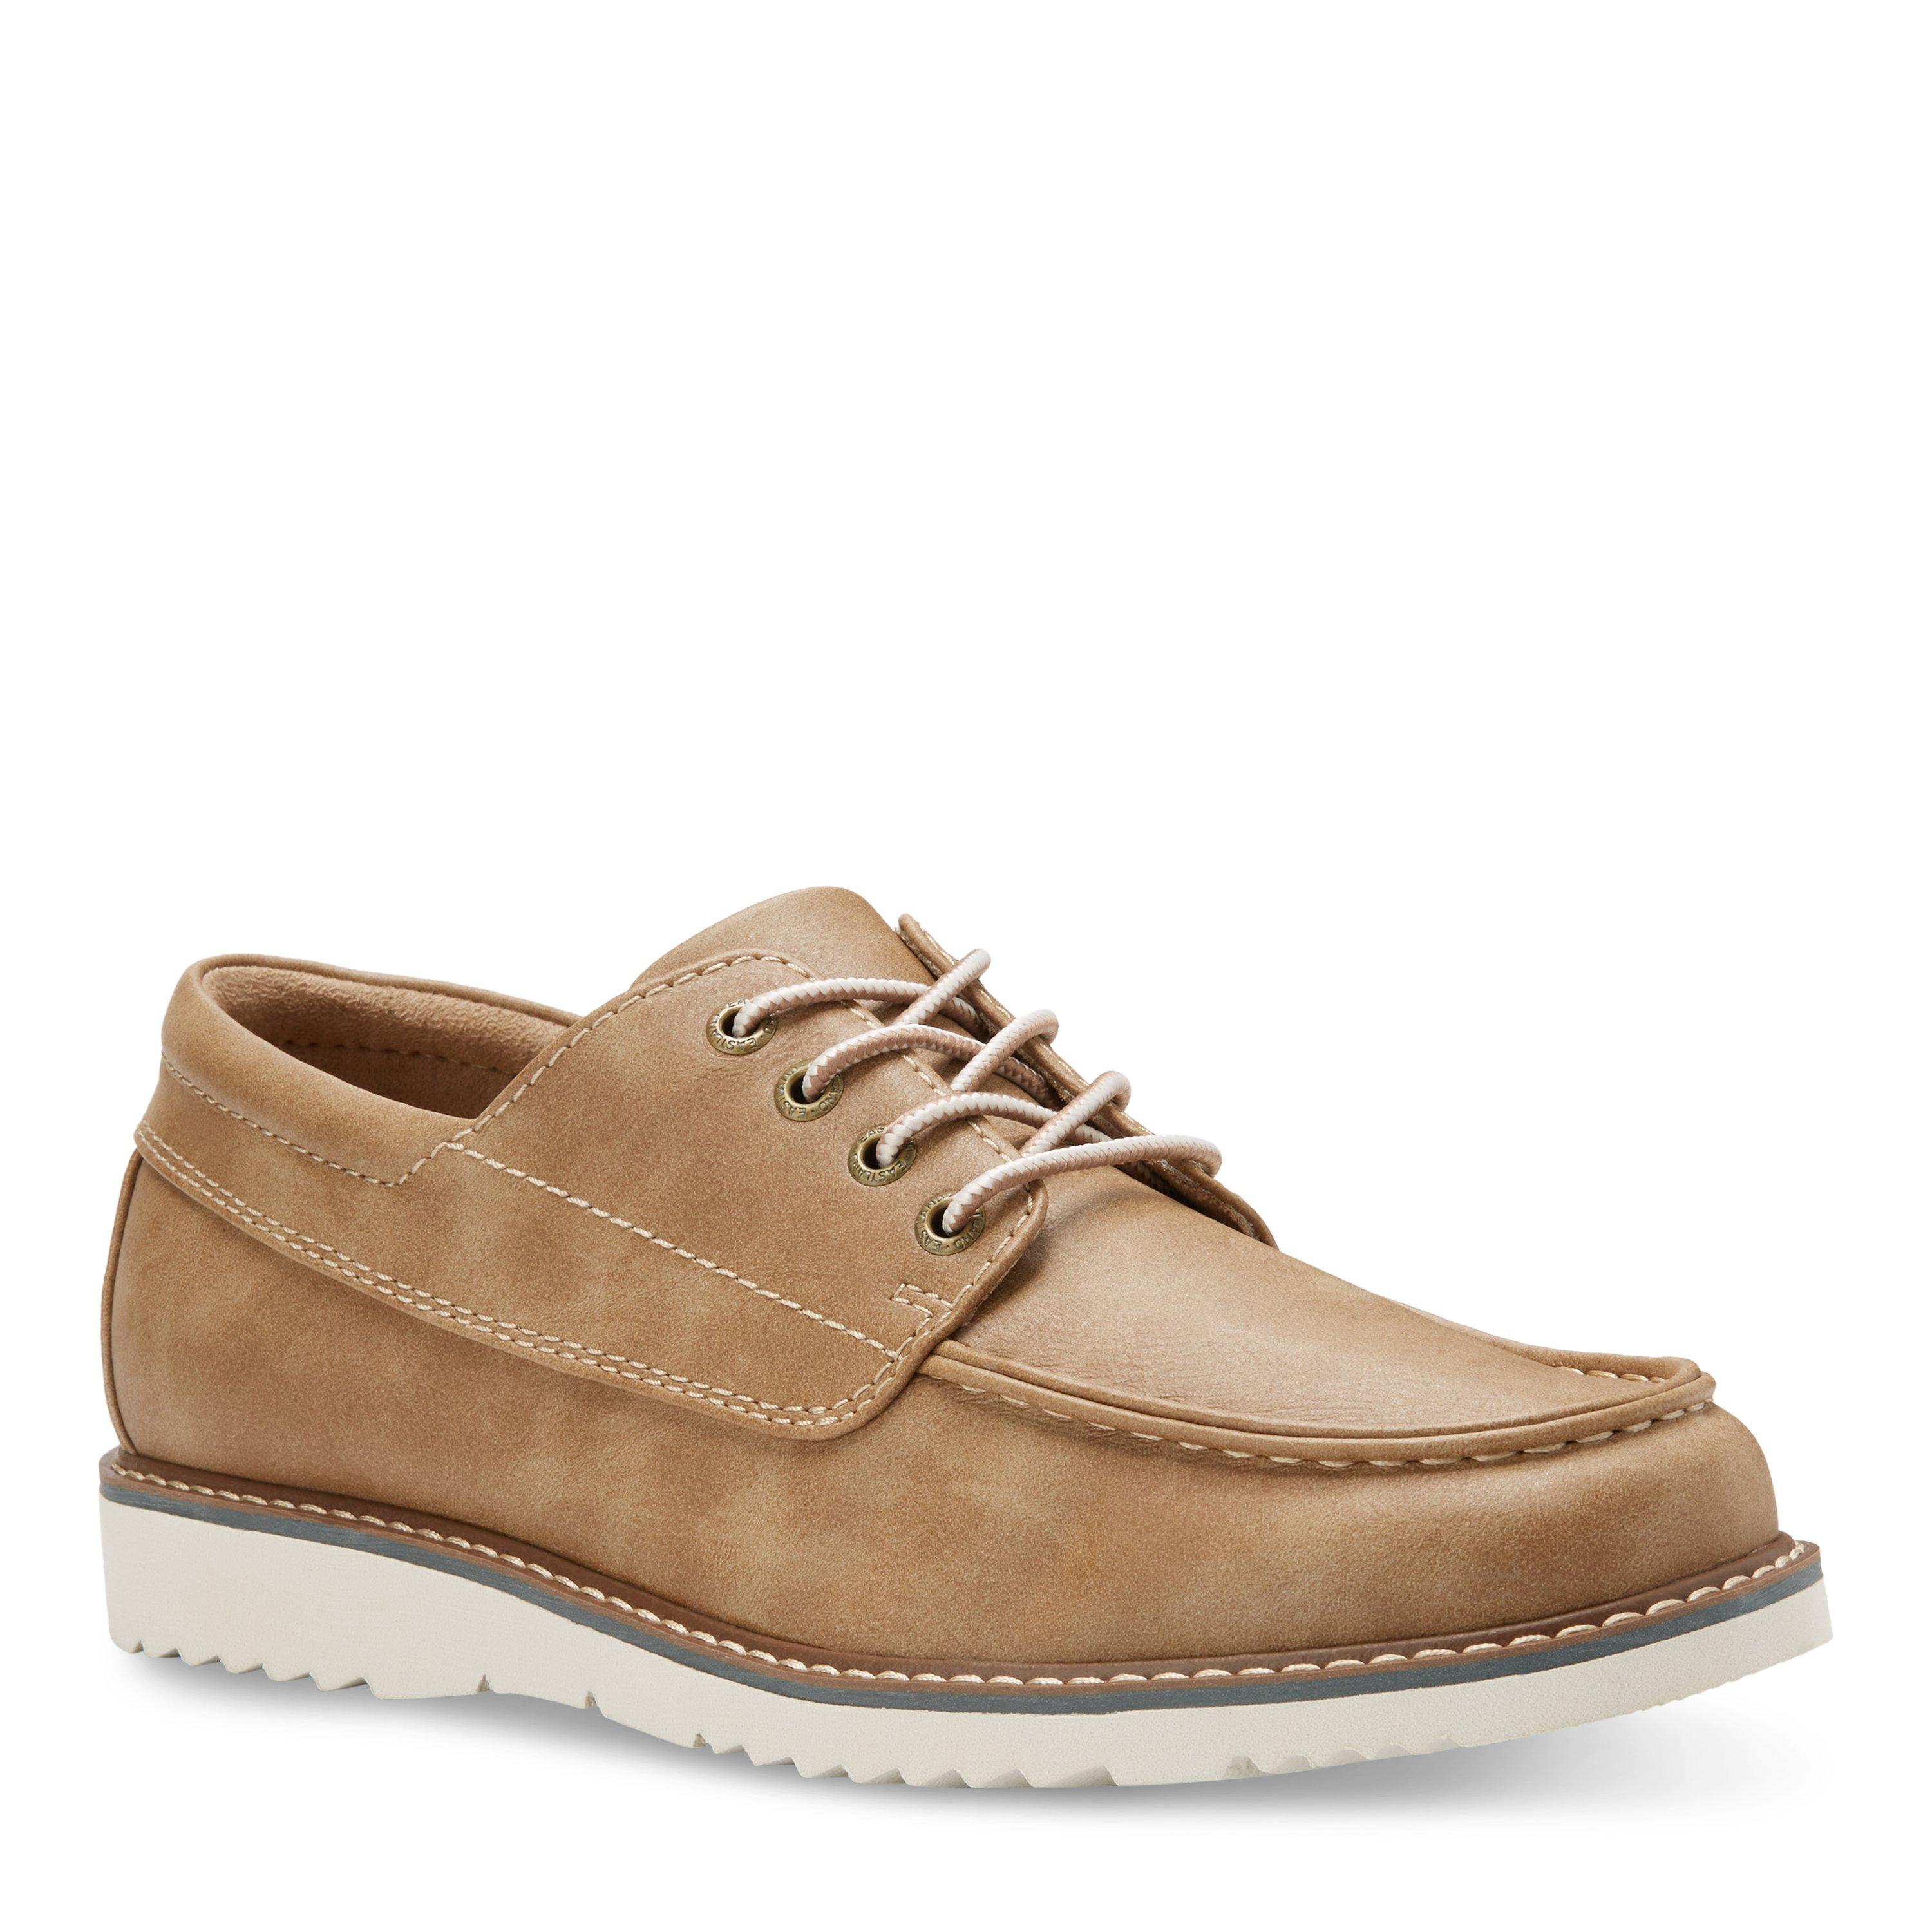 Eastland Mens Jed Oxford Shoes